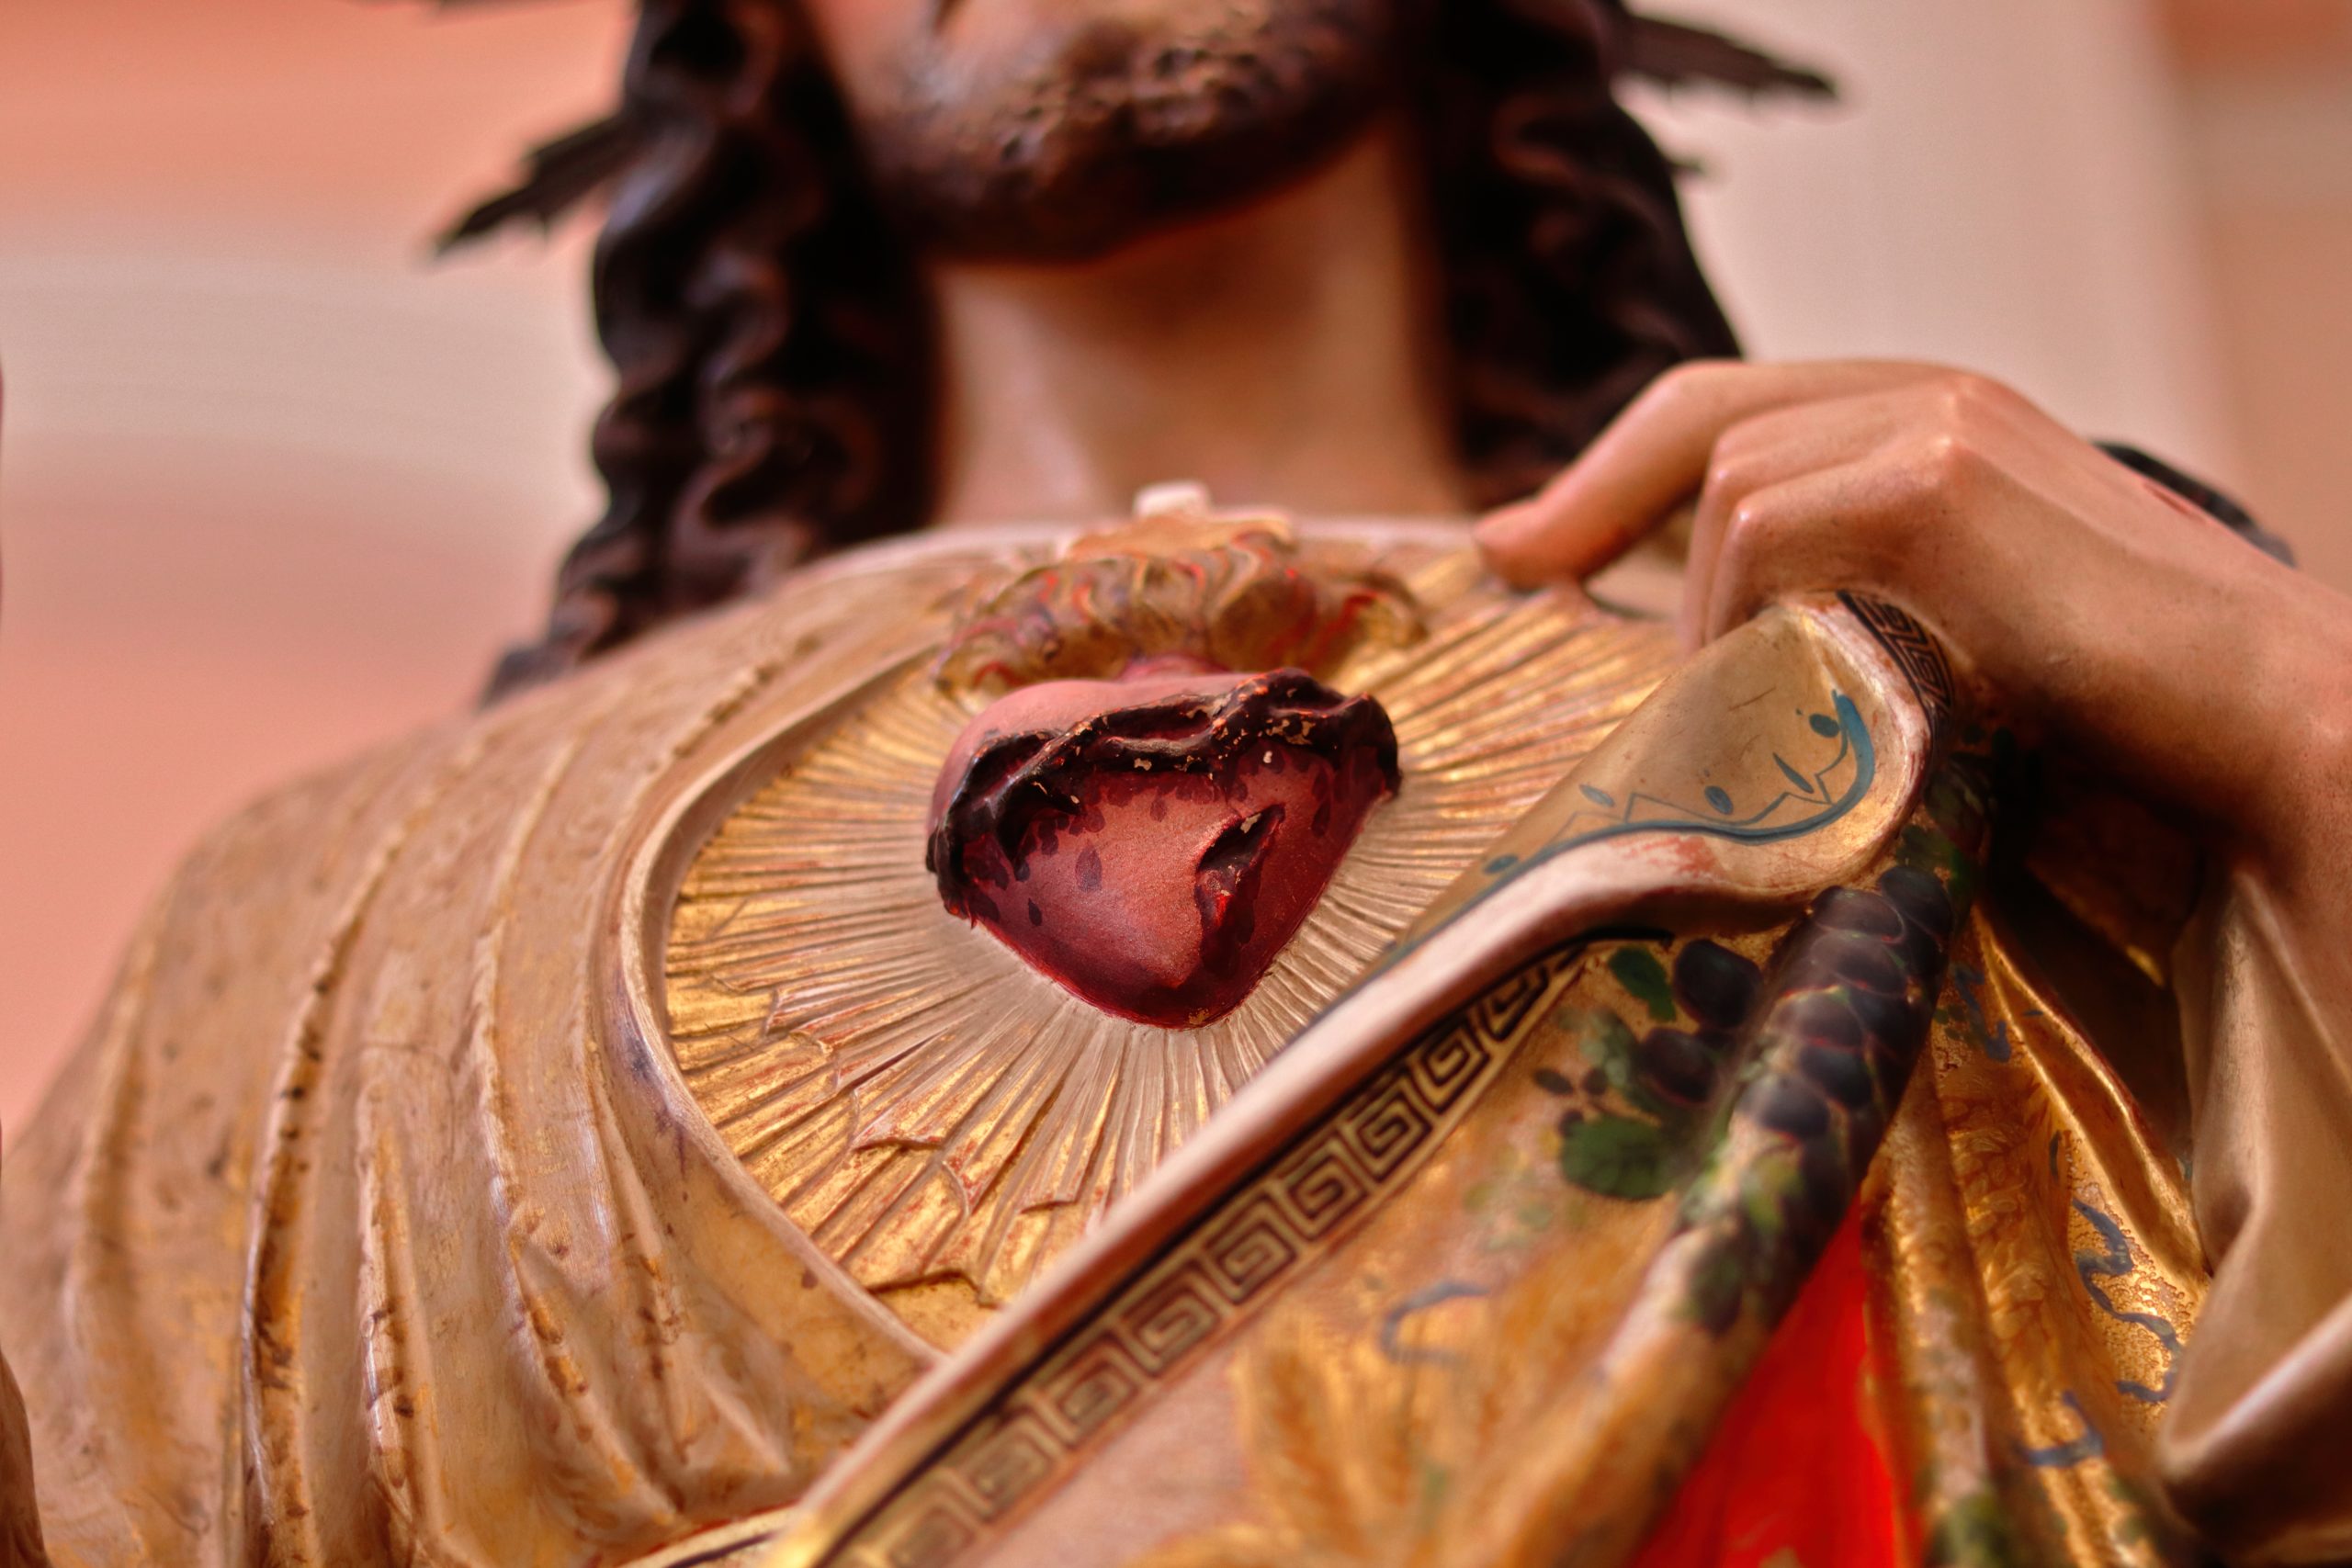 Healing the Wounded Body of Christ